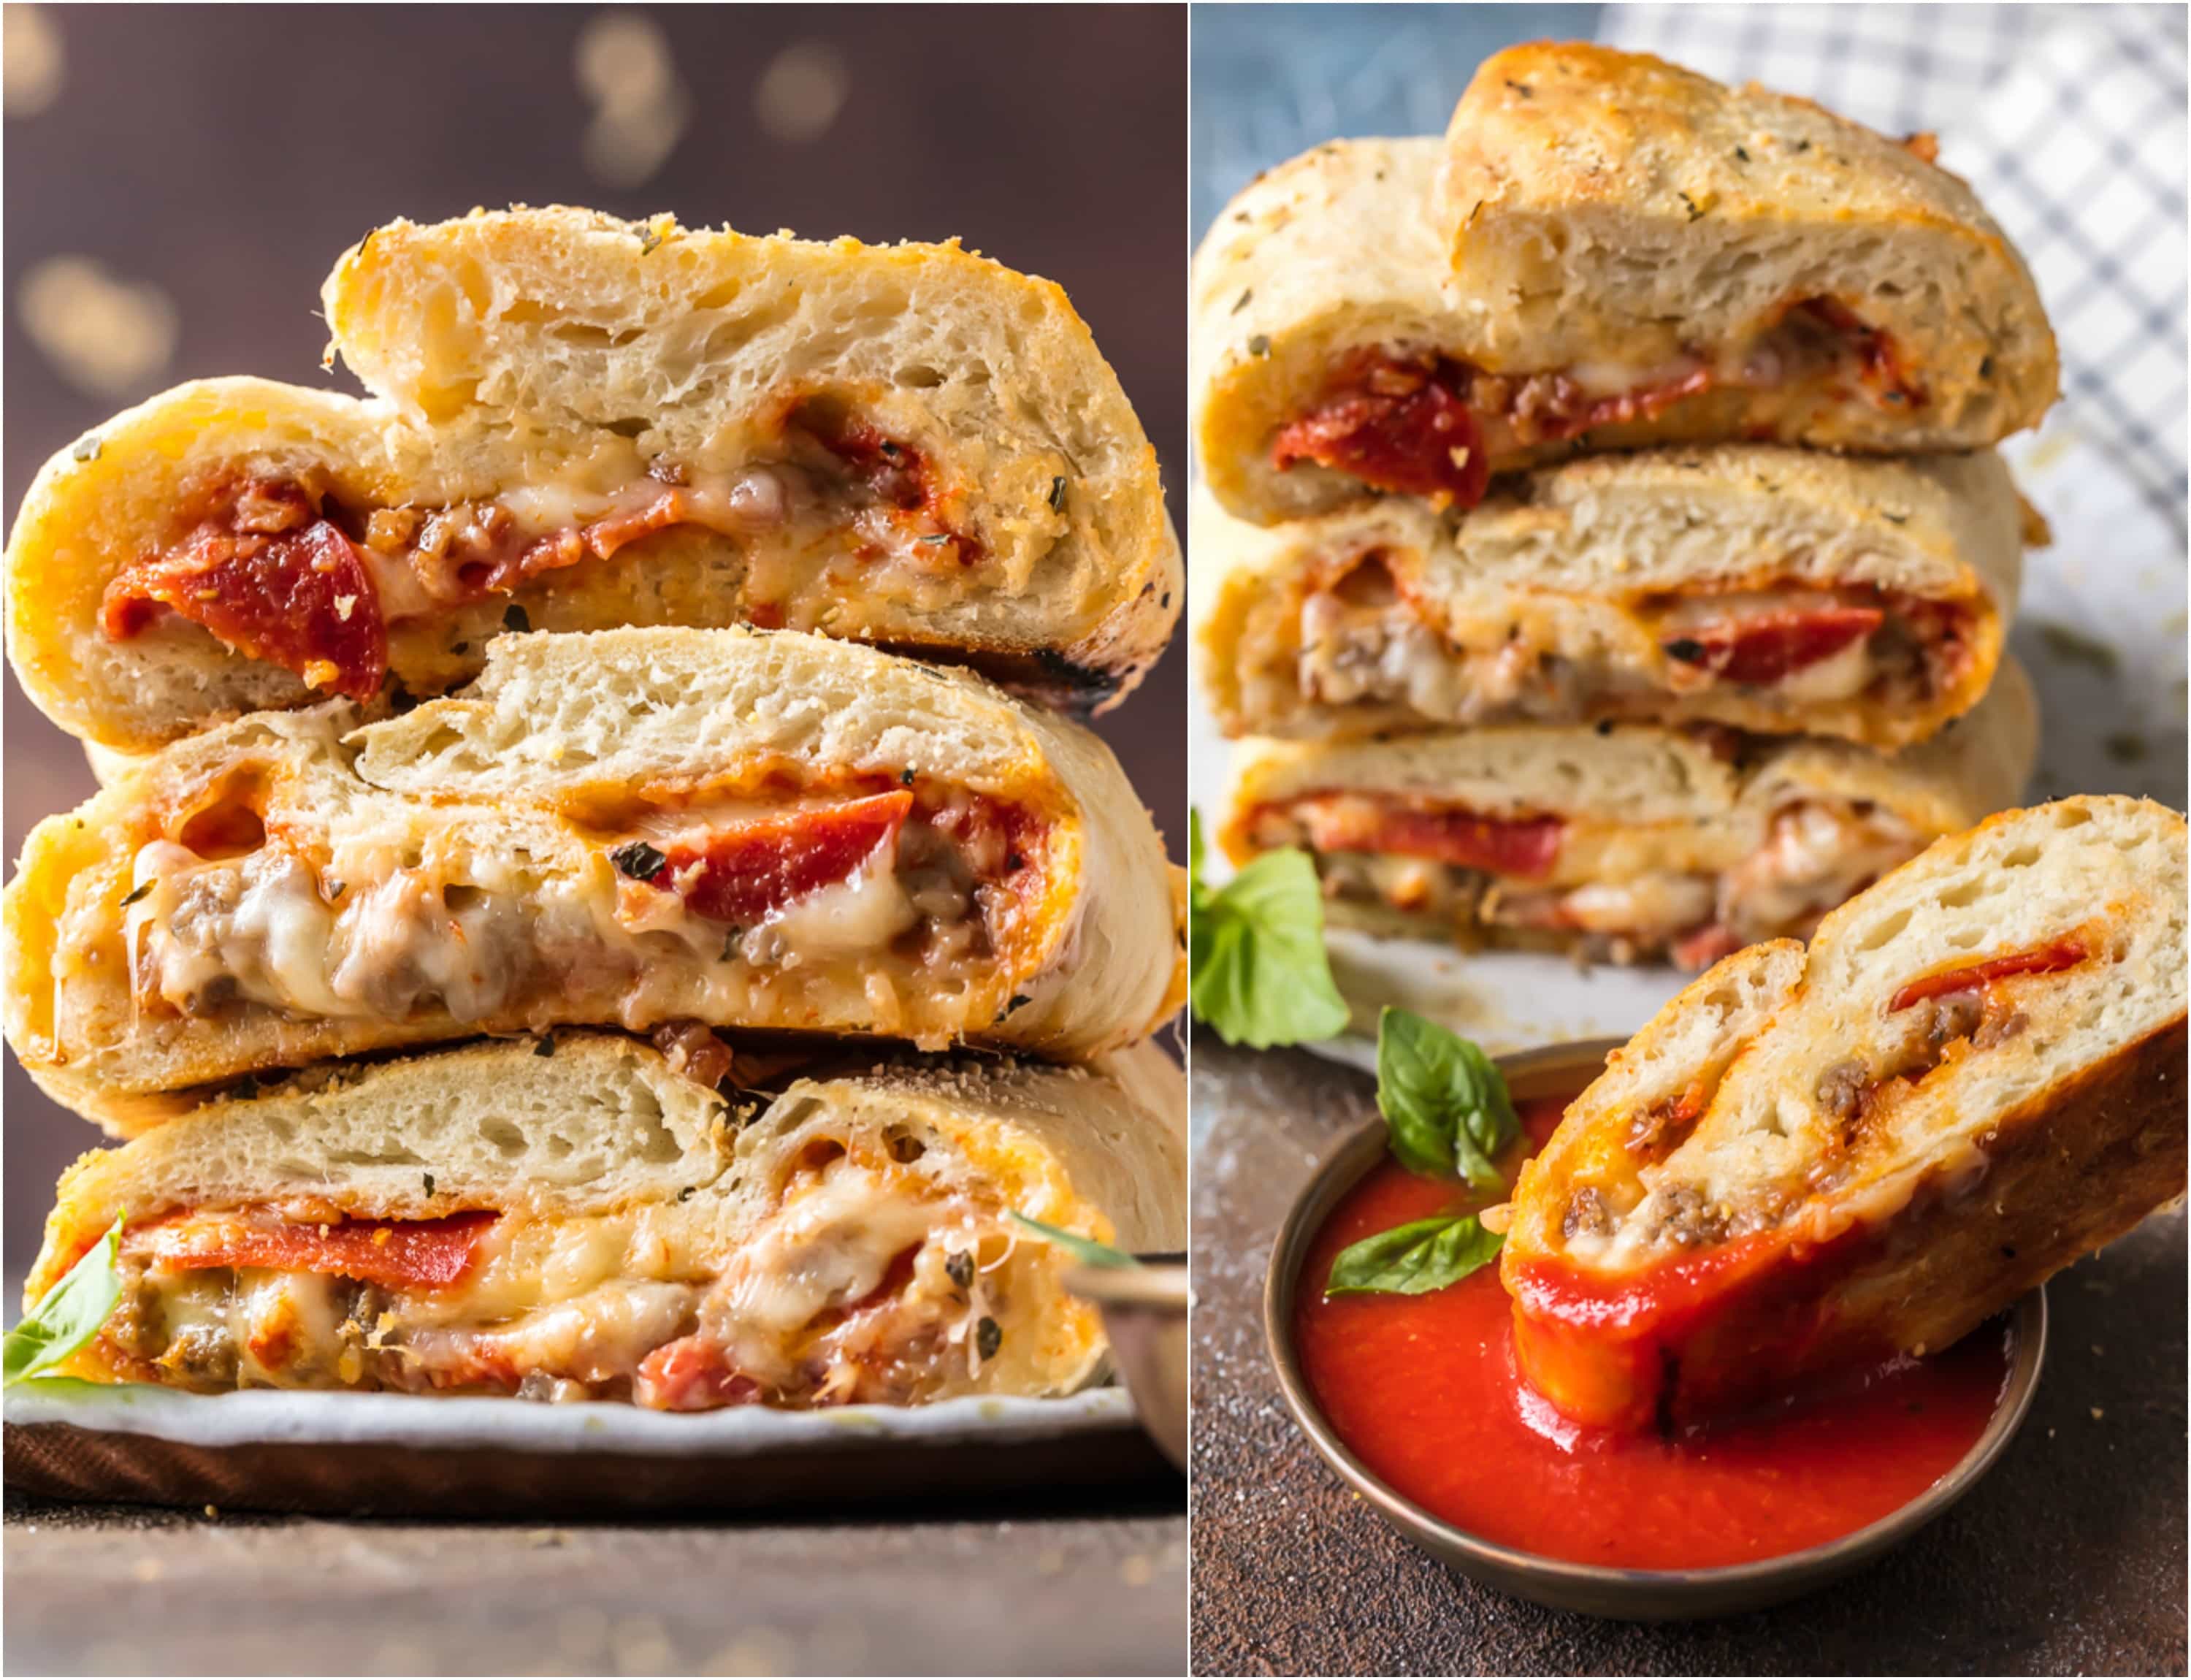 This EASY Stromboli Recipe is one of our go-to weeknight meals the entire family LOVES. Meat Lovers Stromboli is stuffed with juicy sausage, pepperoni, and bacon and loaded with cheese. The crust bakes up crispy on the outside and fluffy on the inside for the ultimate and perfect Stromboli! 